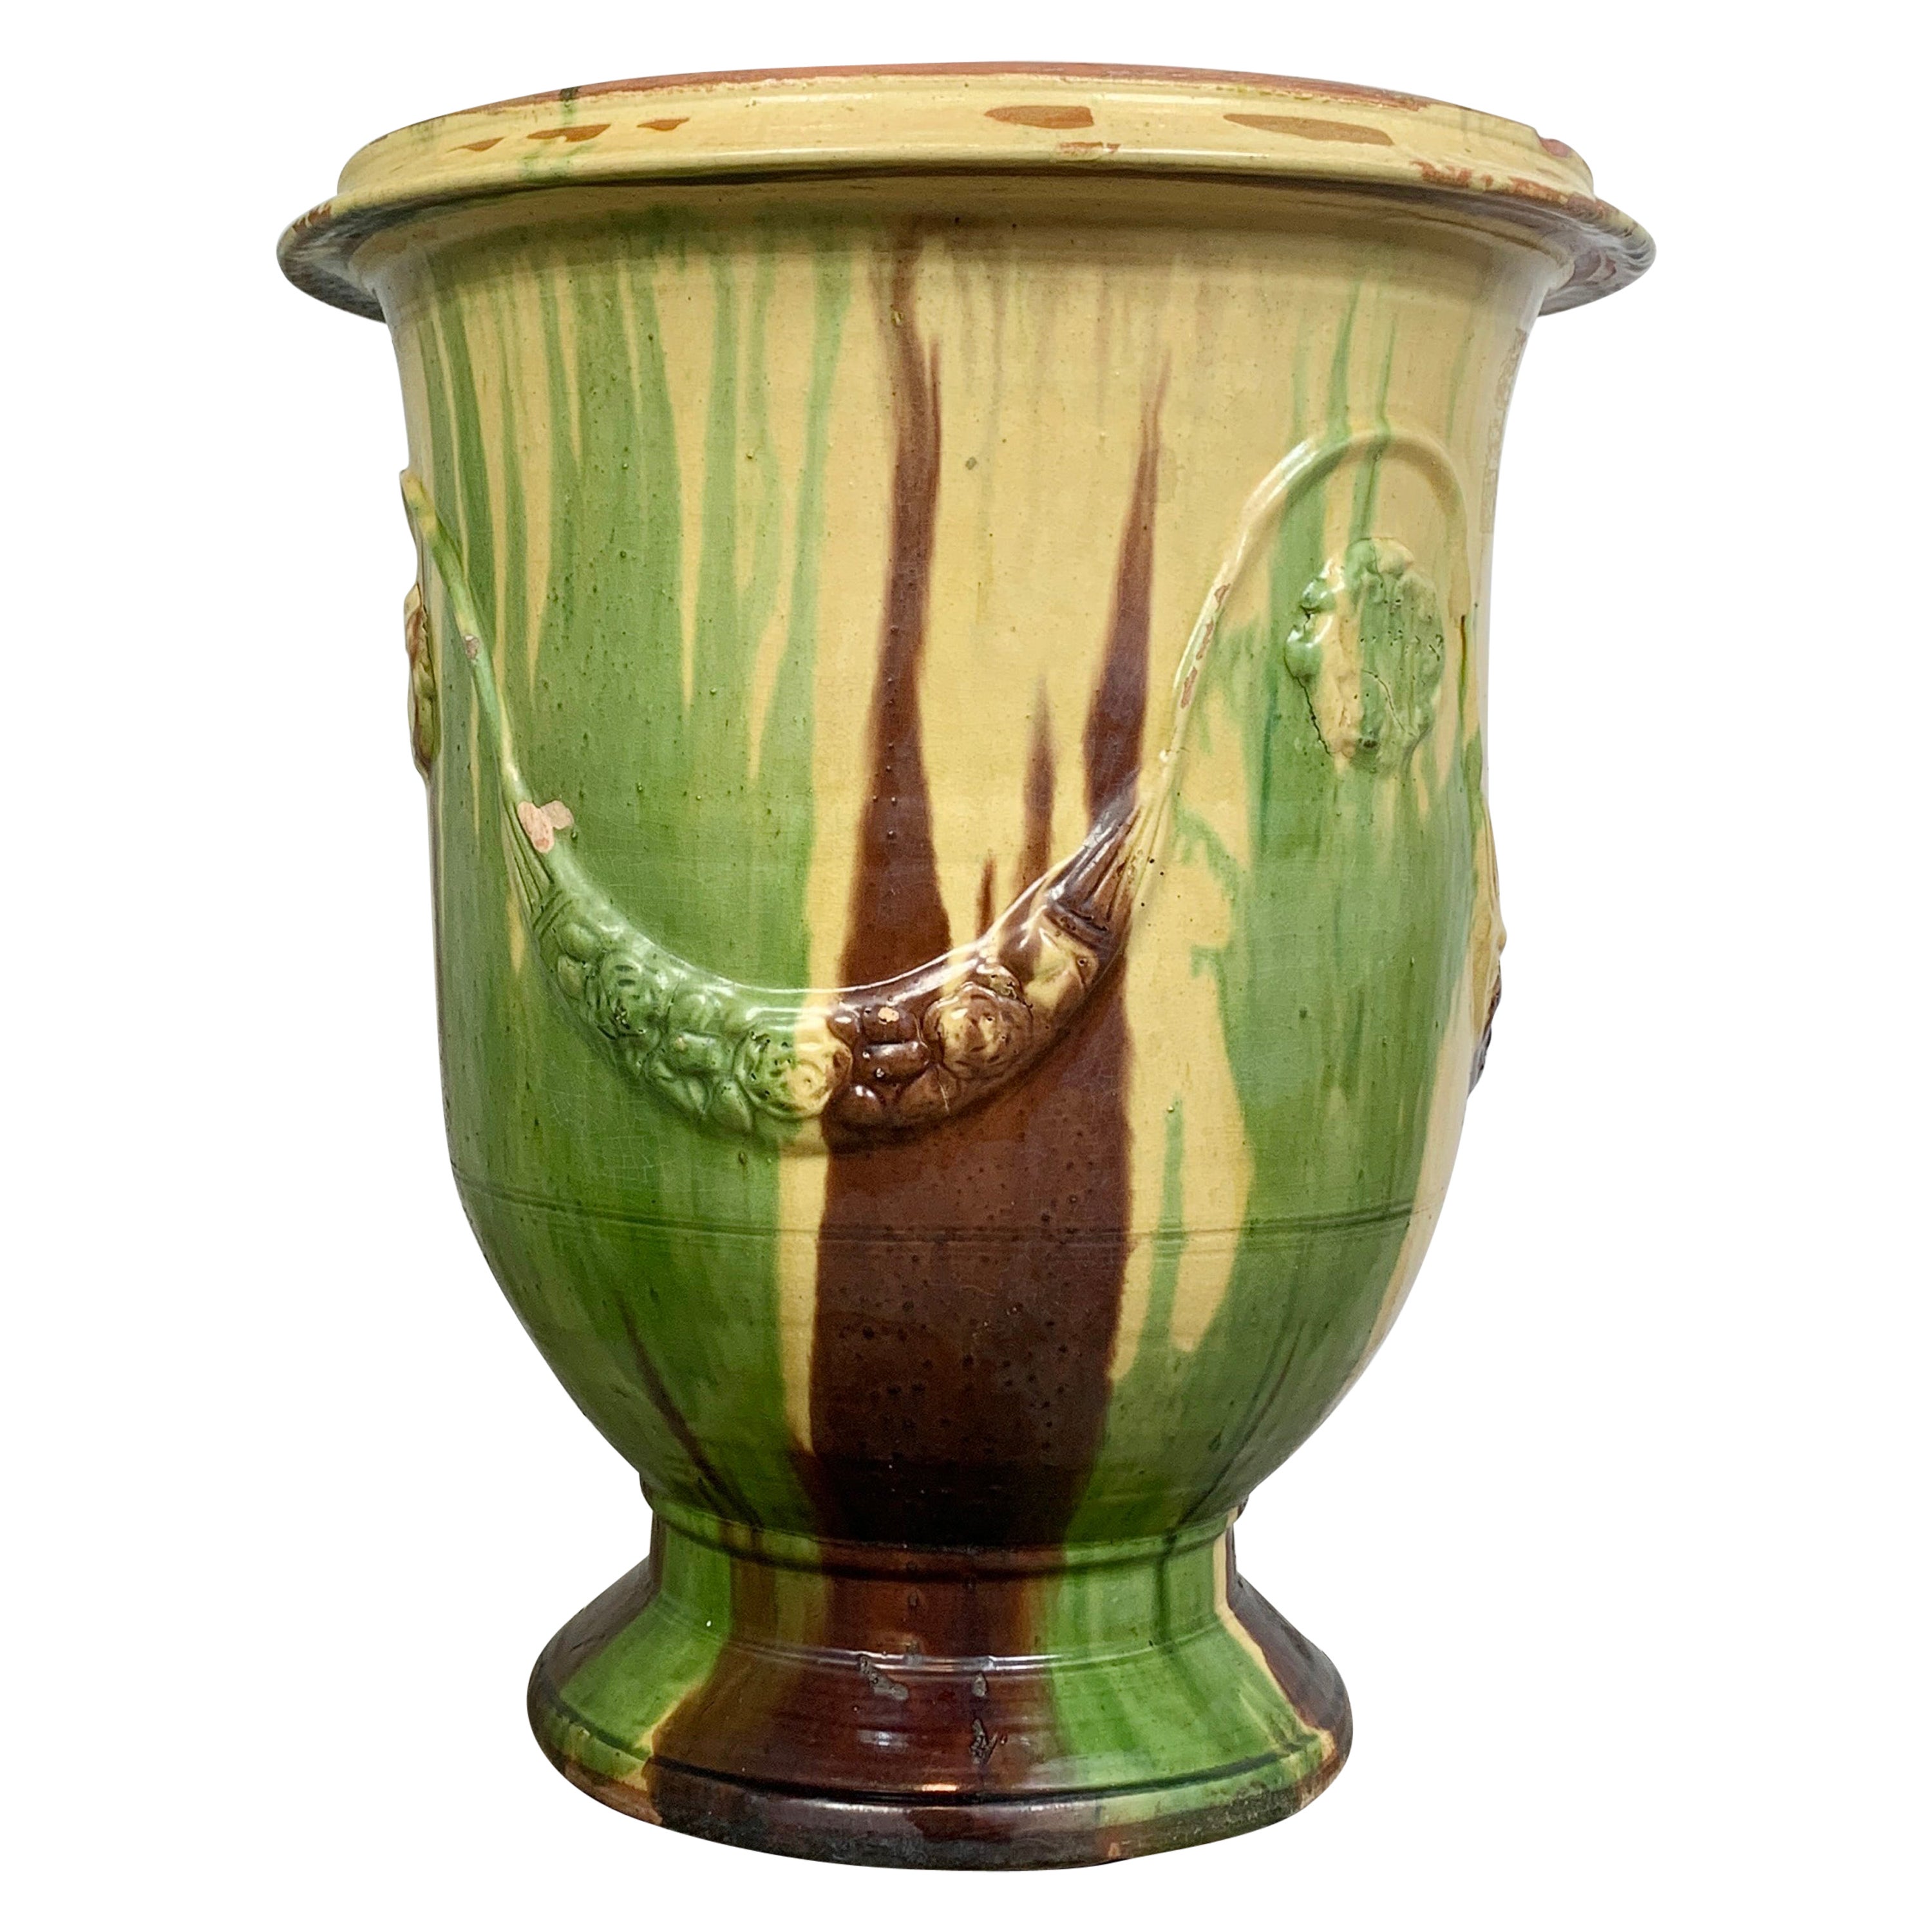 Large Terracotta Urn in the Anduze manner, green tones